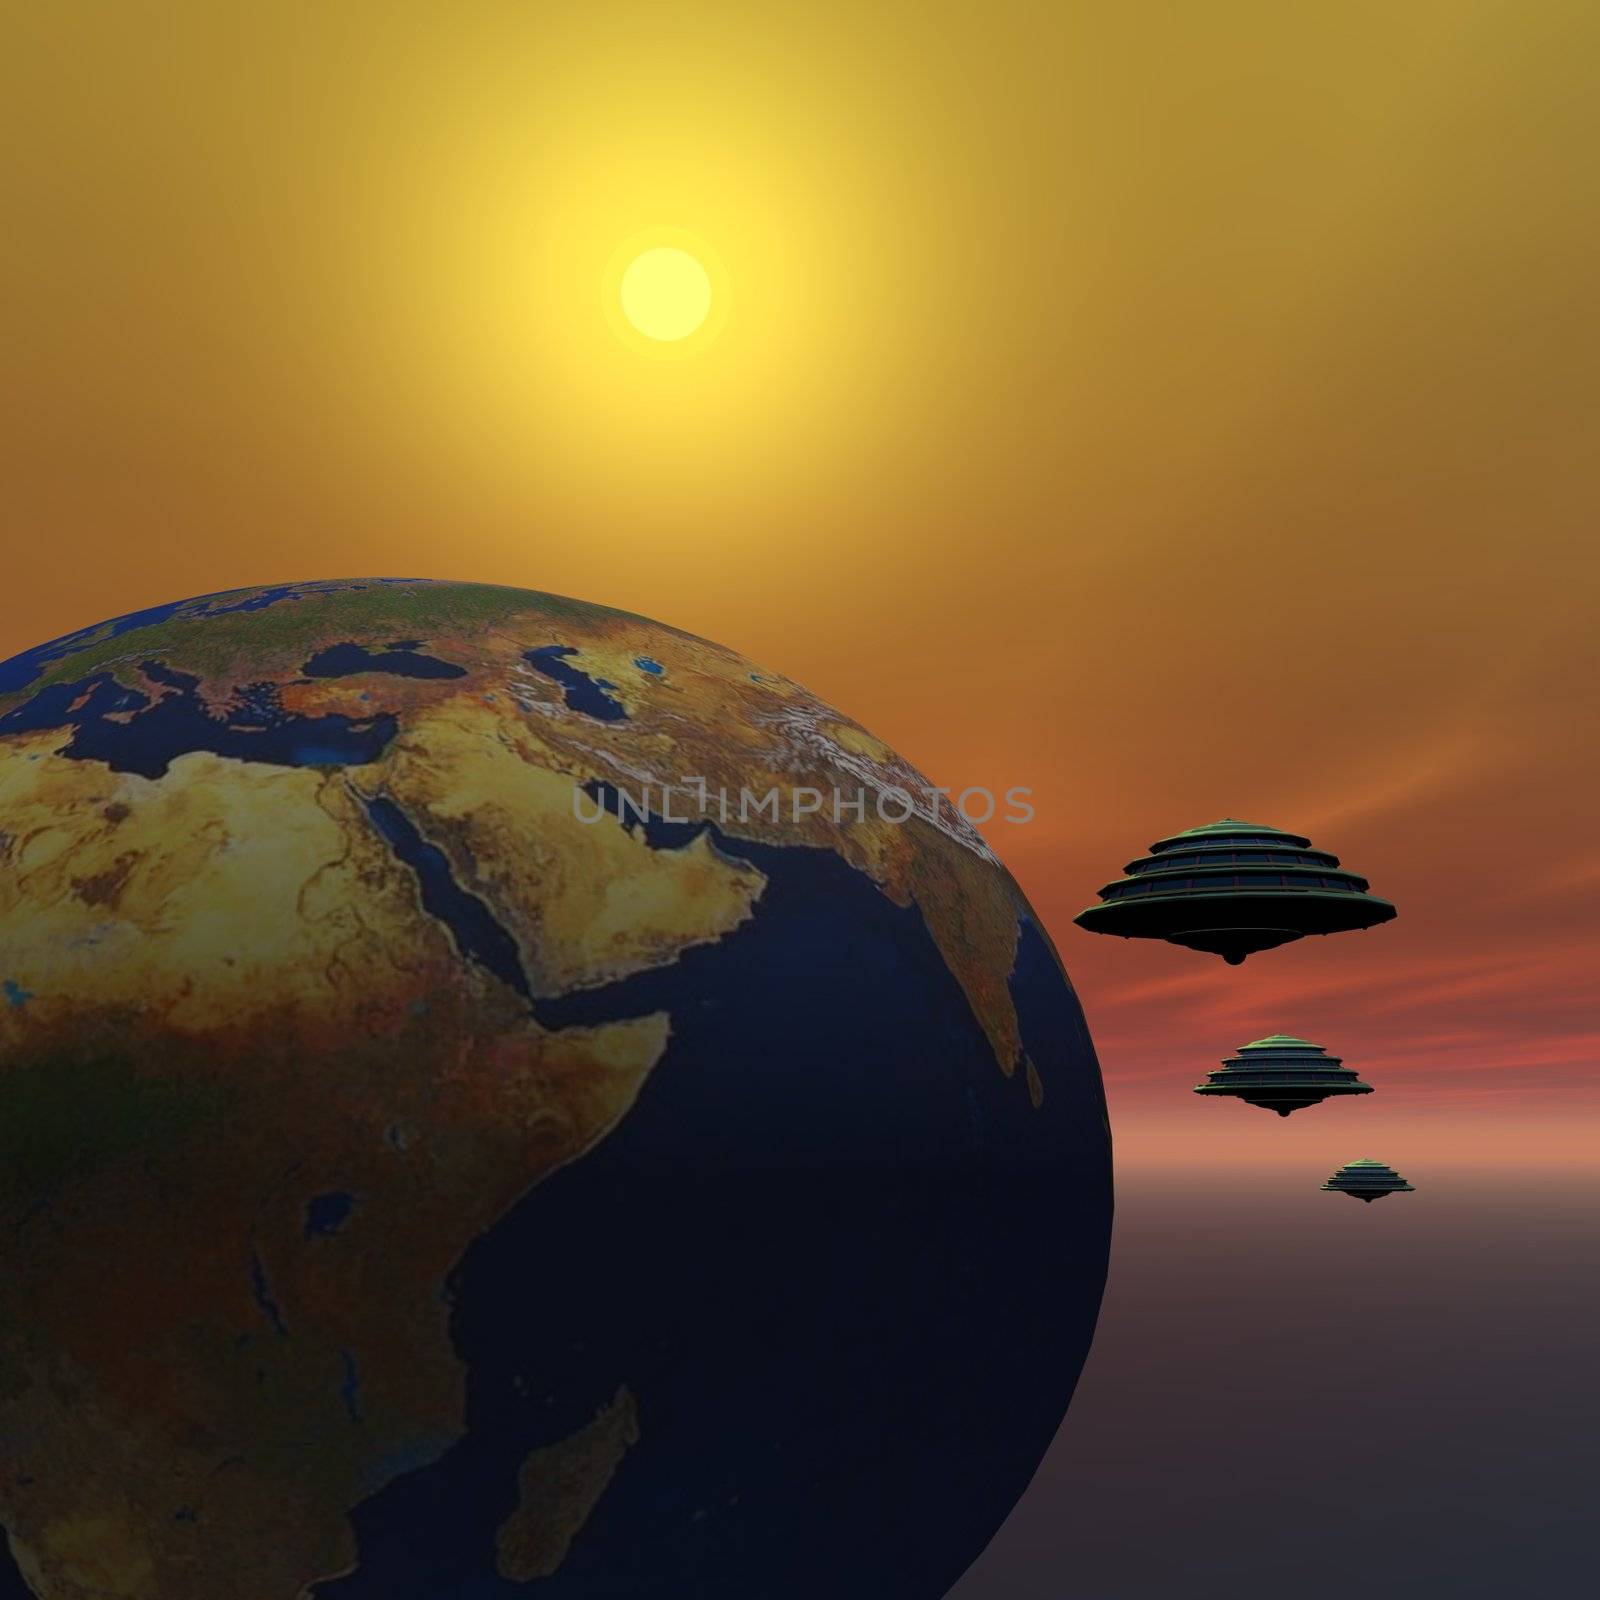 Flying saucers make a visit to Earth.